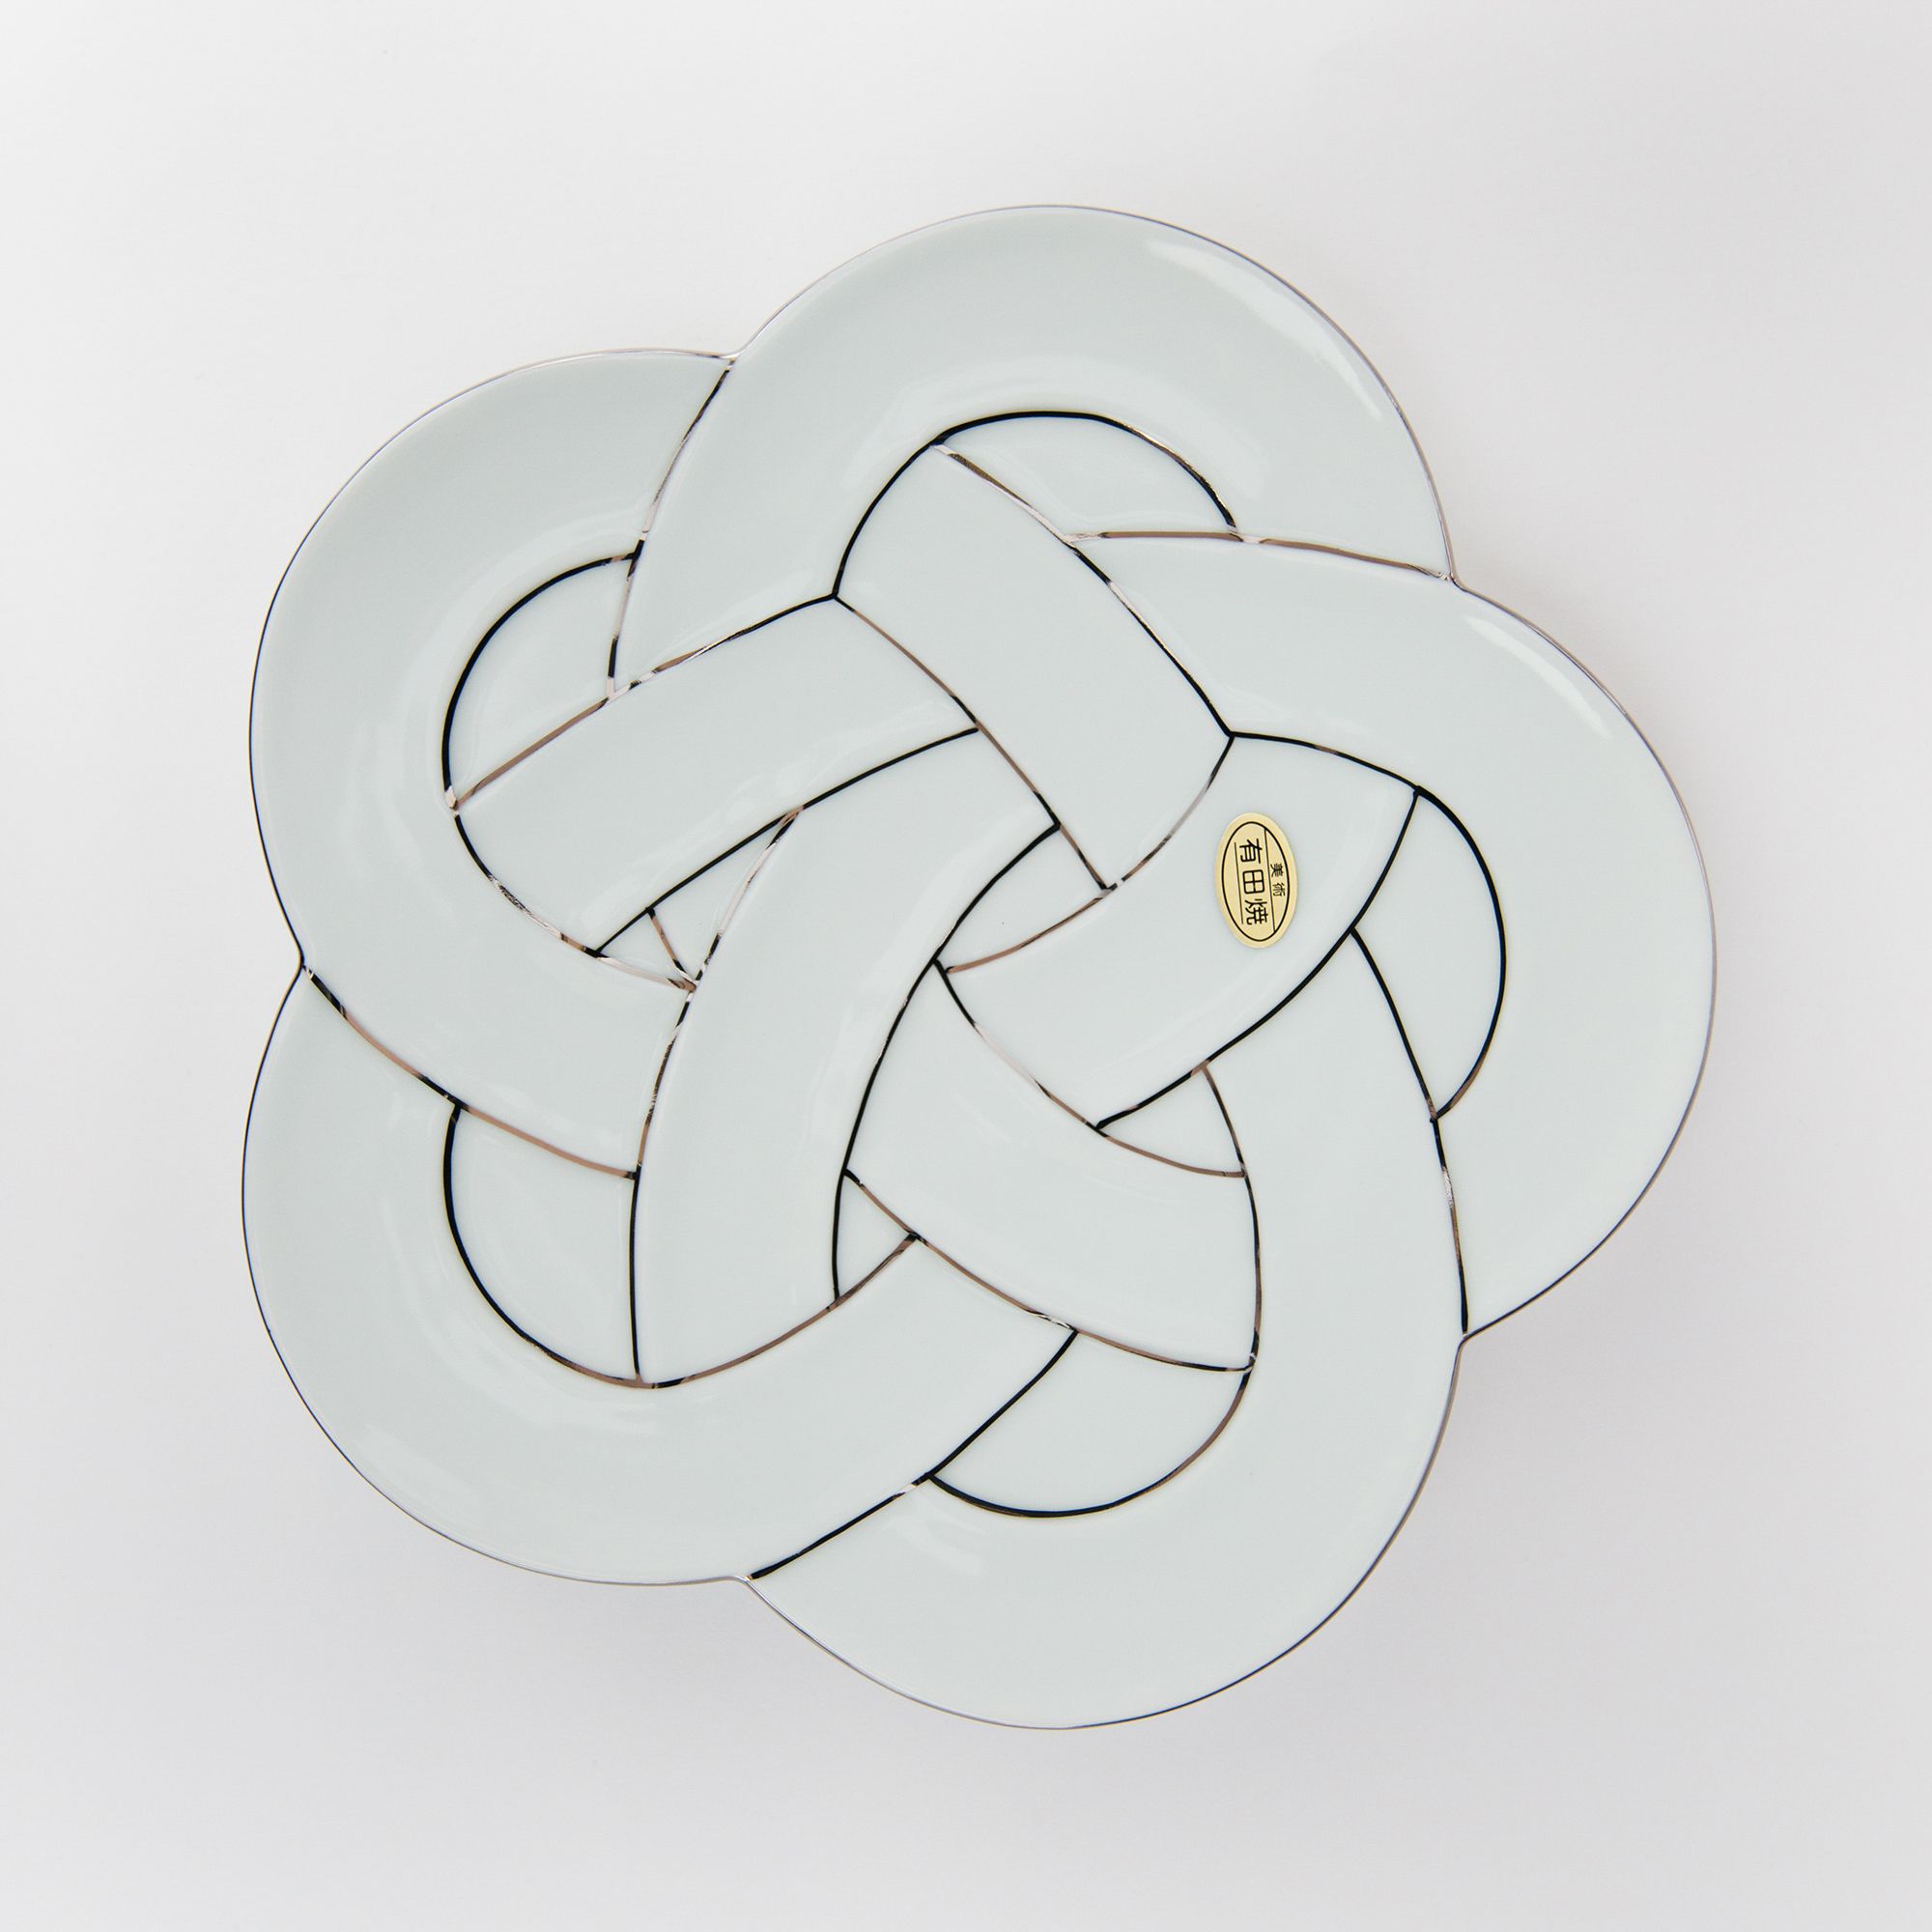 ARITA Ware Star Knot Serving Plate - TASEIGAMA Musubi Collection - Platinum Wire